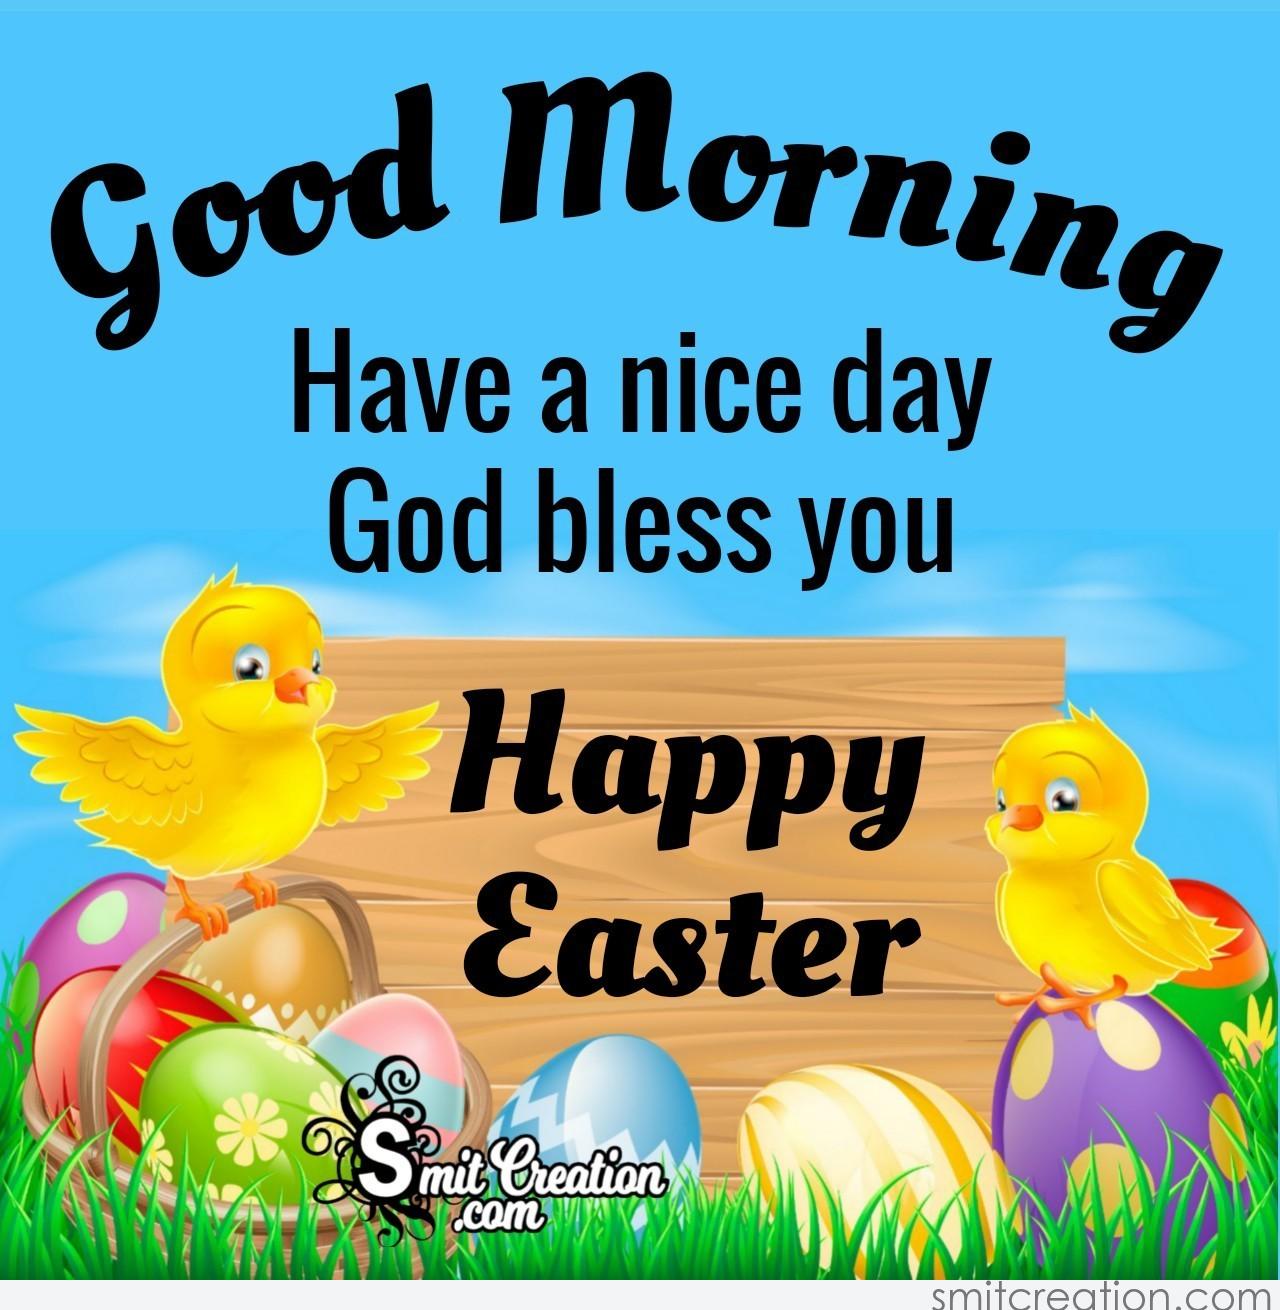 Good Morning Have A Nice Day Happy Easter - SmitCreation.com